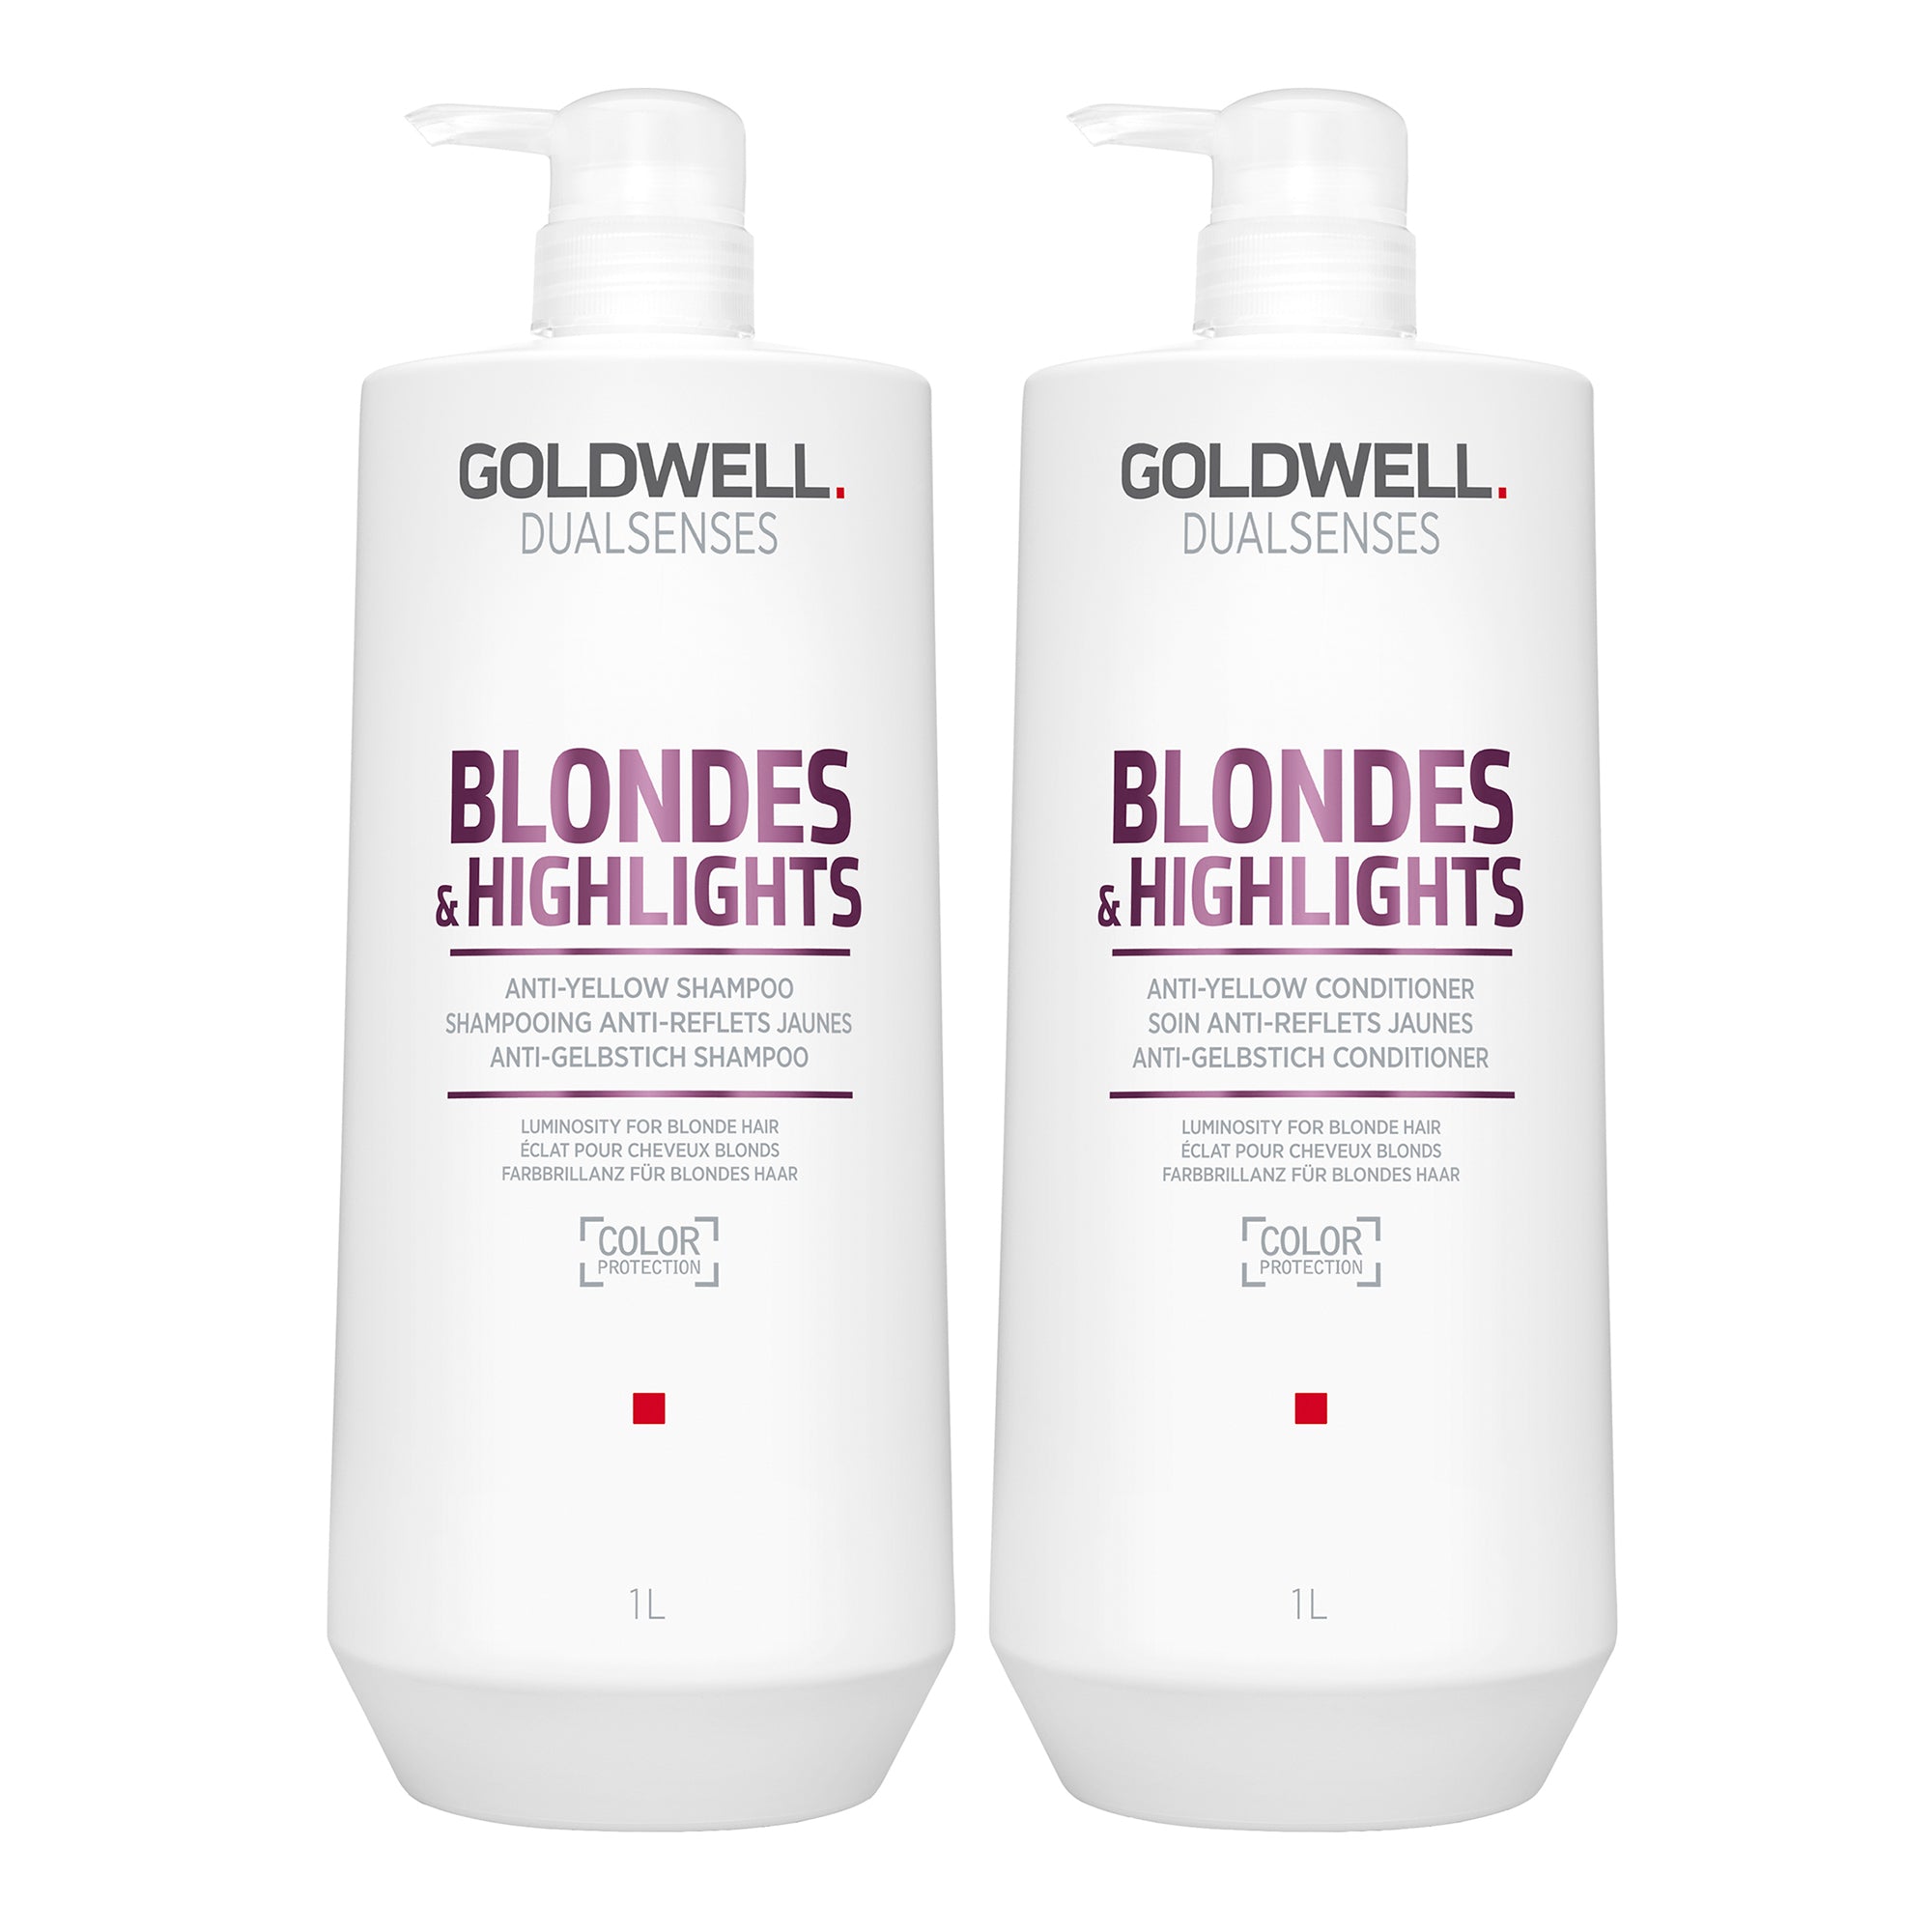 Goldwell Blonde & Highlights Shampoo and Conditioner Duo - Liter ($85 Value) / 33.8OZ